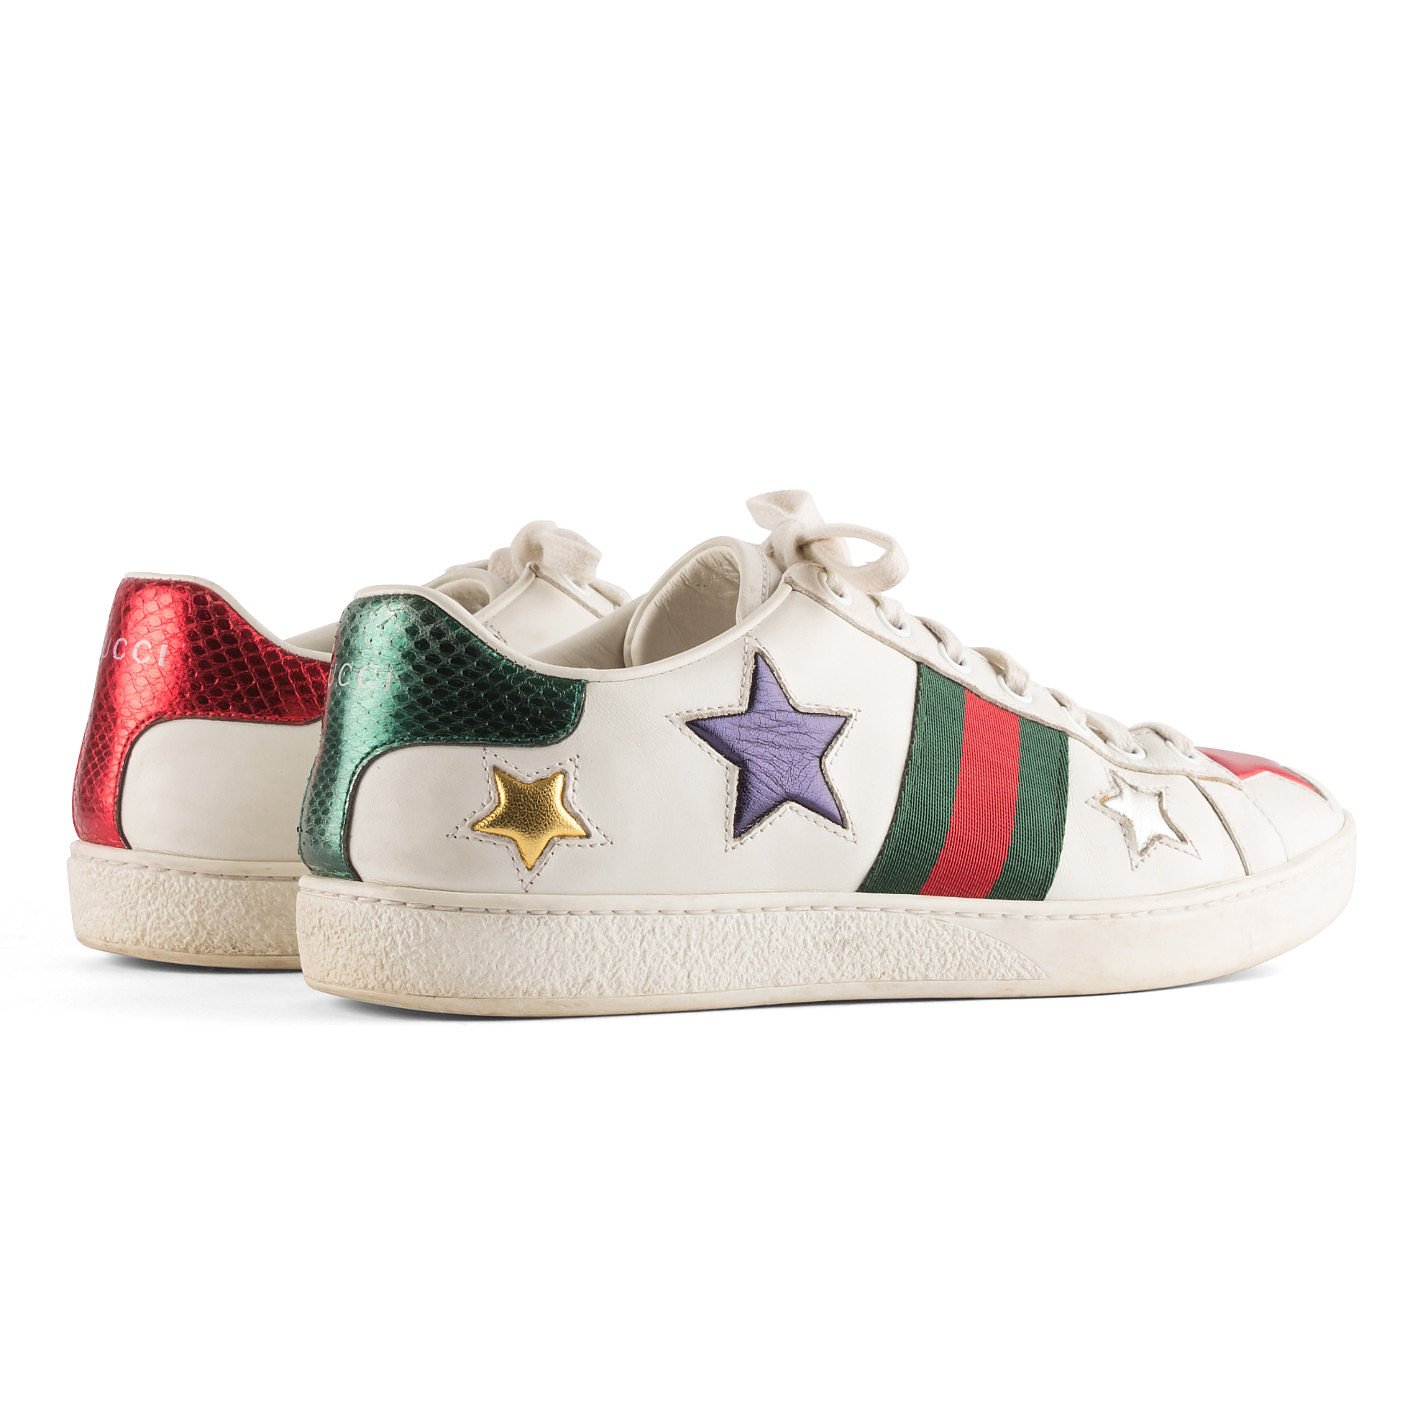 sneakers for thought gucci crocs